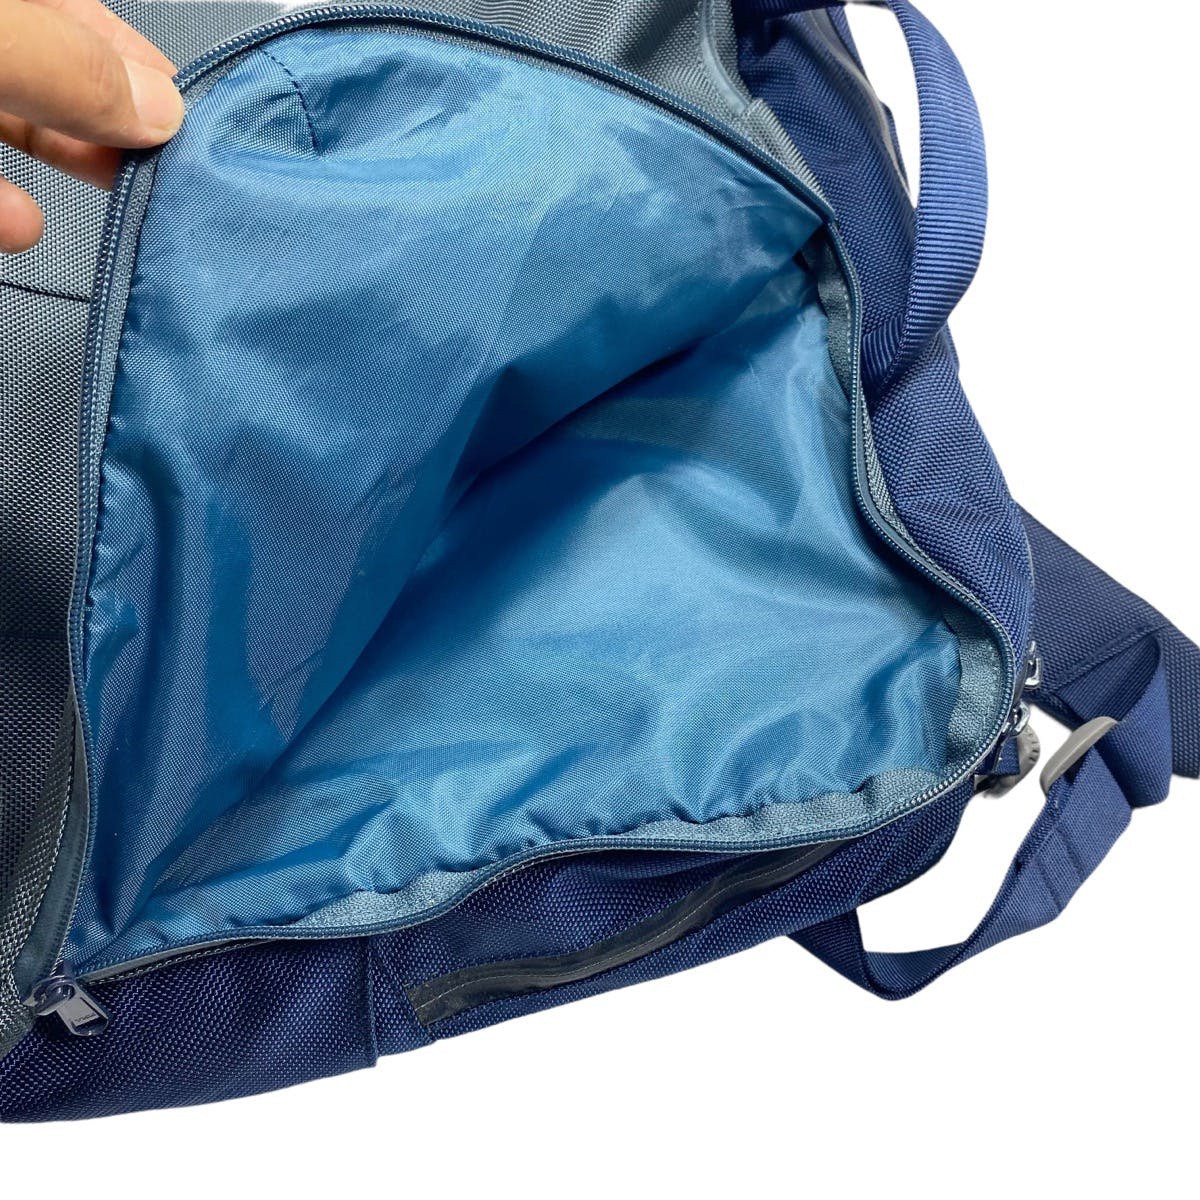 The North Face Shuttle Series Pack Project Messenger Bag - 8